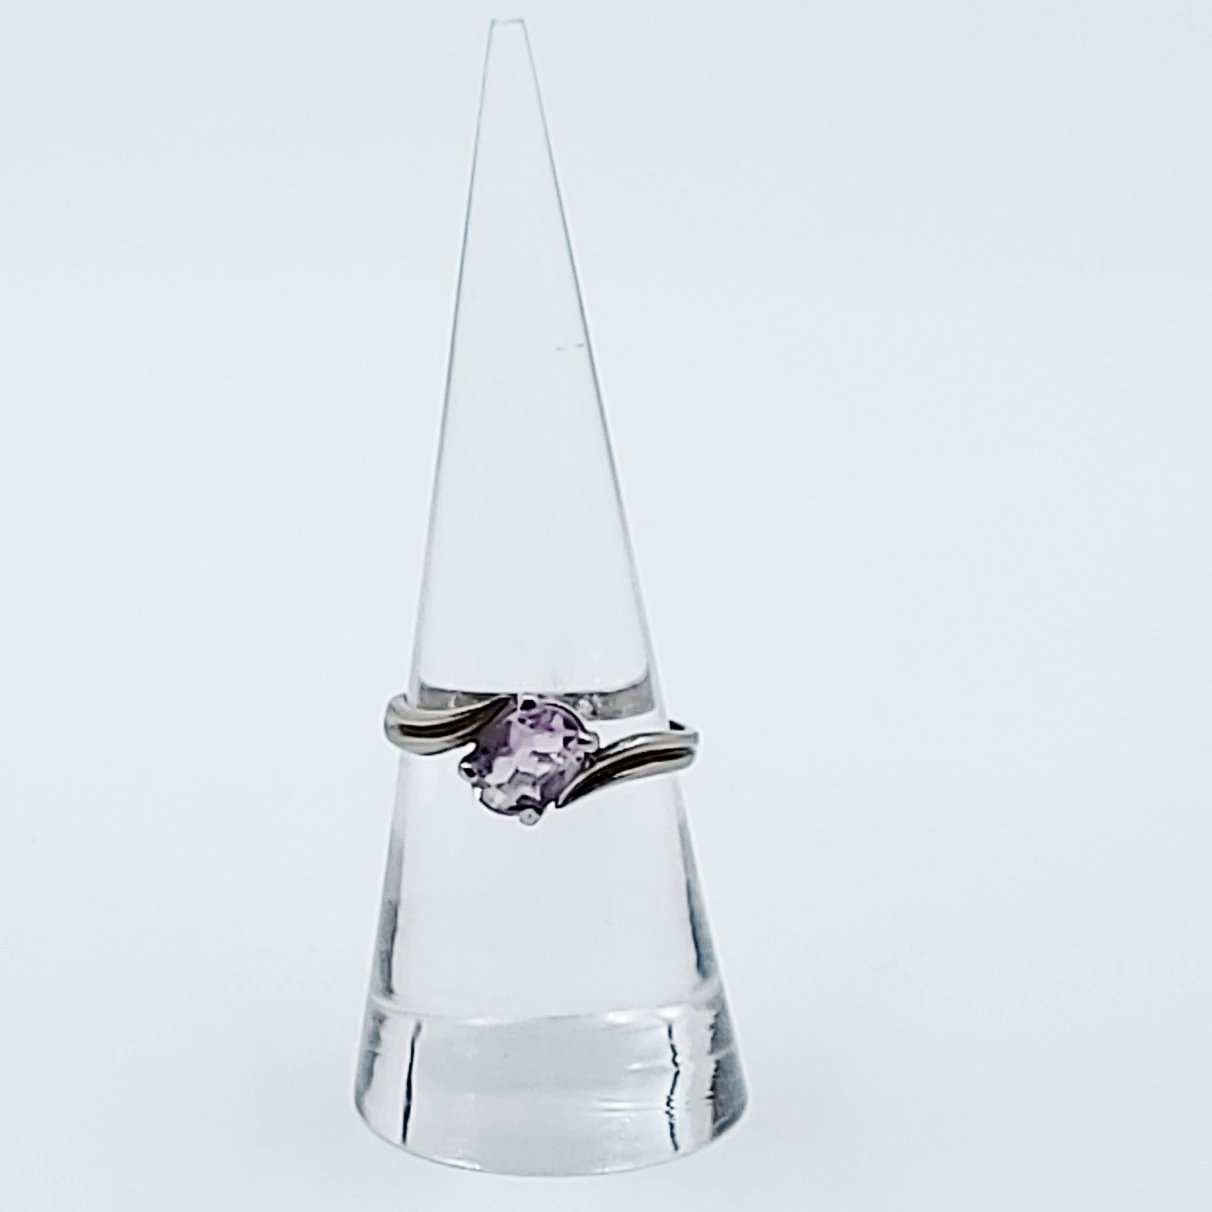 Amethyst Ring 1.5 ct Sterling Silver Band - Elevated Metaphysical